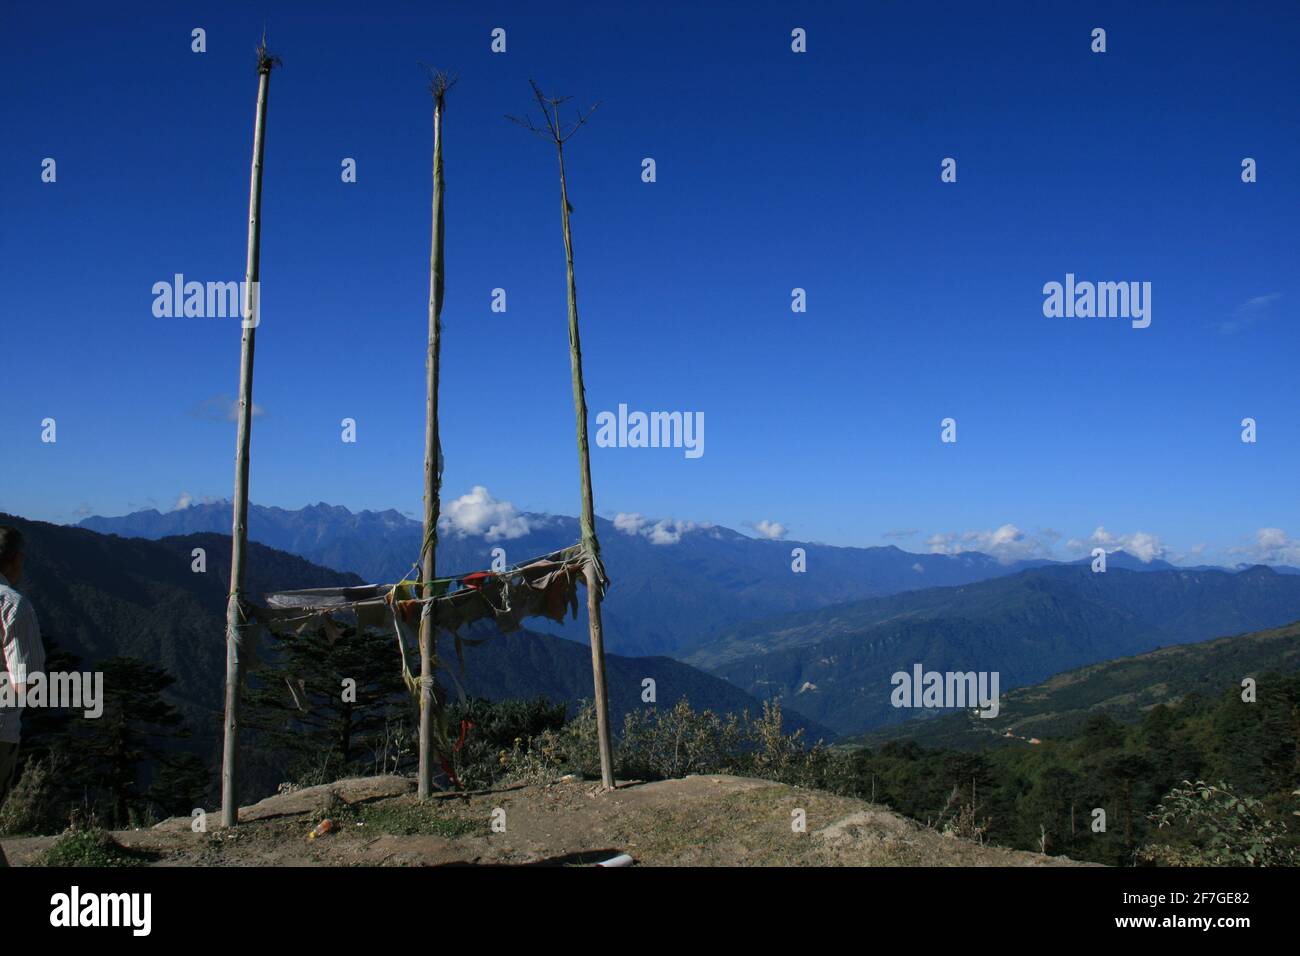 Buddhist prayer flags blow colorfully in the wind. In the Kingdom of Bhutan in the Himalayas, Asia, as flags and standing flags with requests and pray Stock Photo